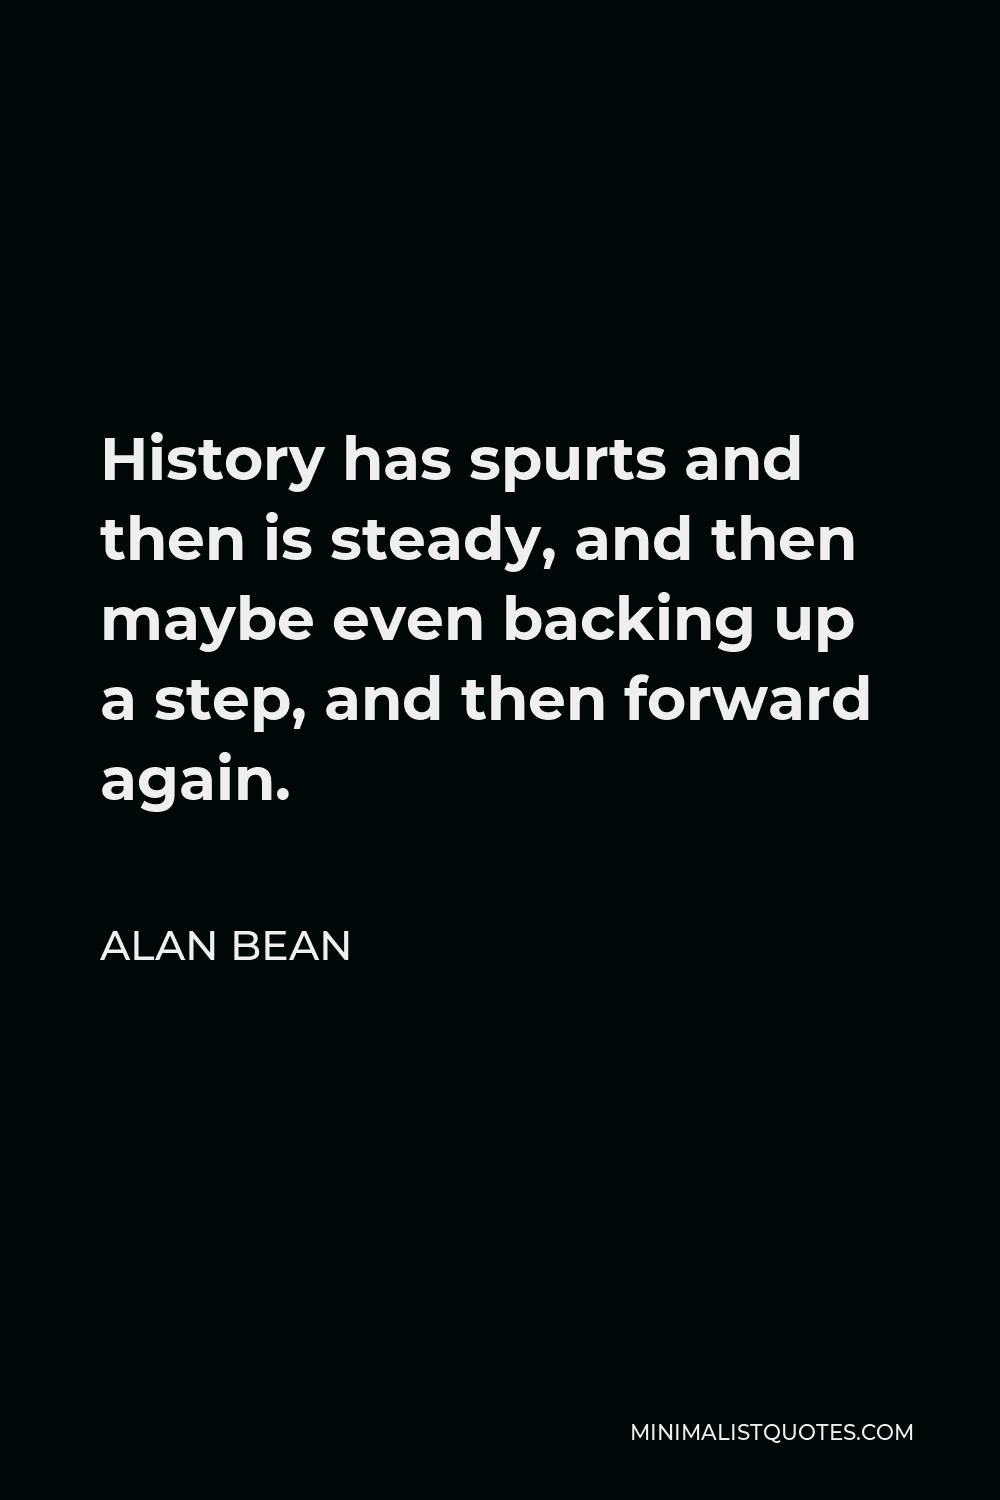 Alan Bean Quote - History has spurts and then is steady, and then maybe even backing up a step, and then forward again.